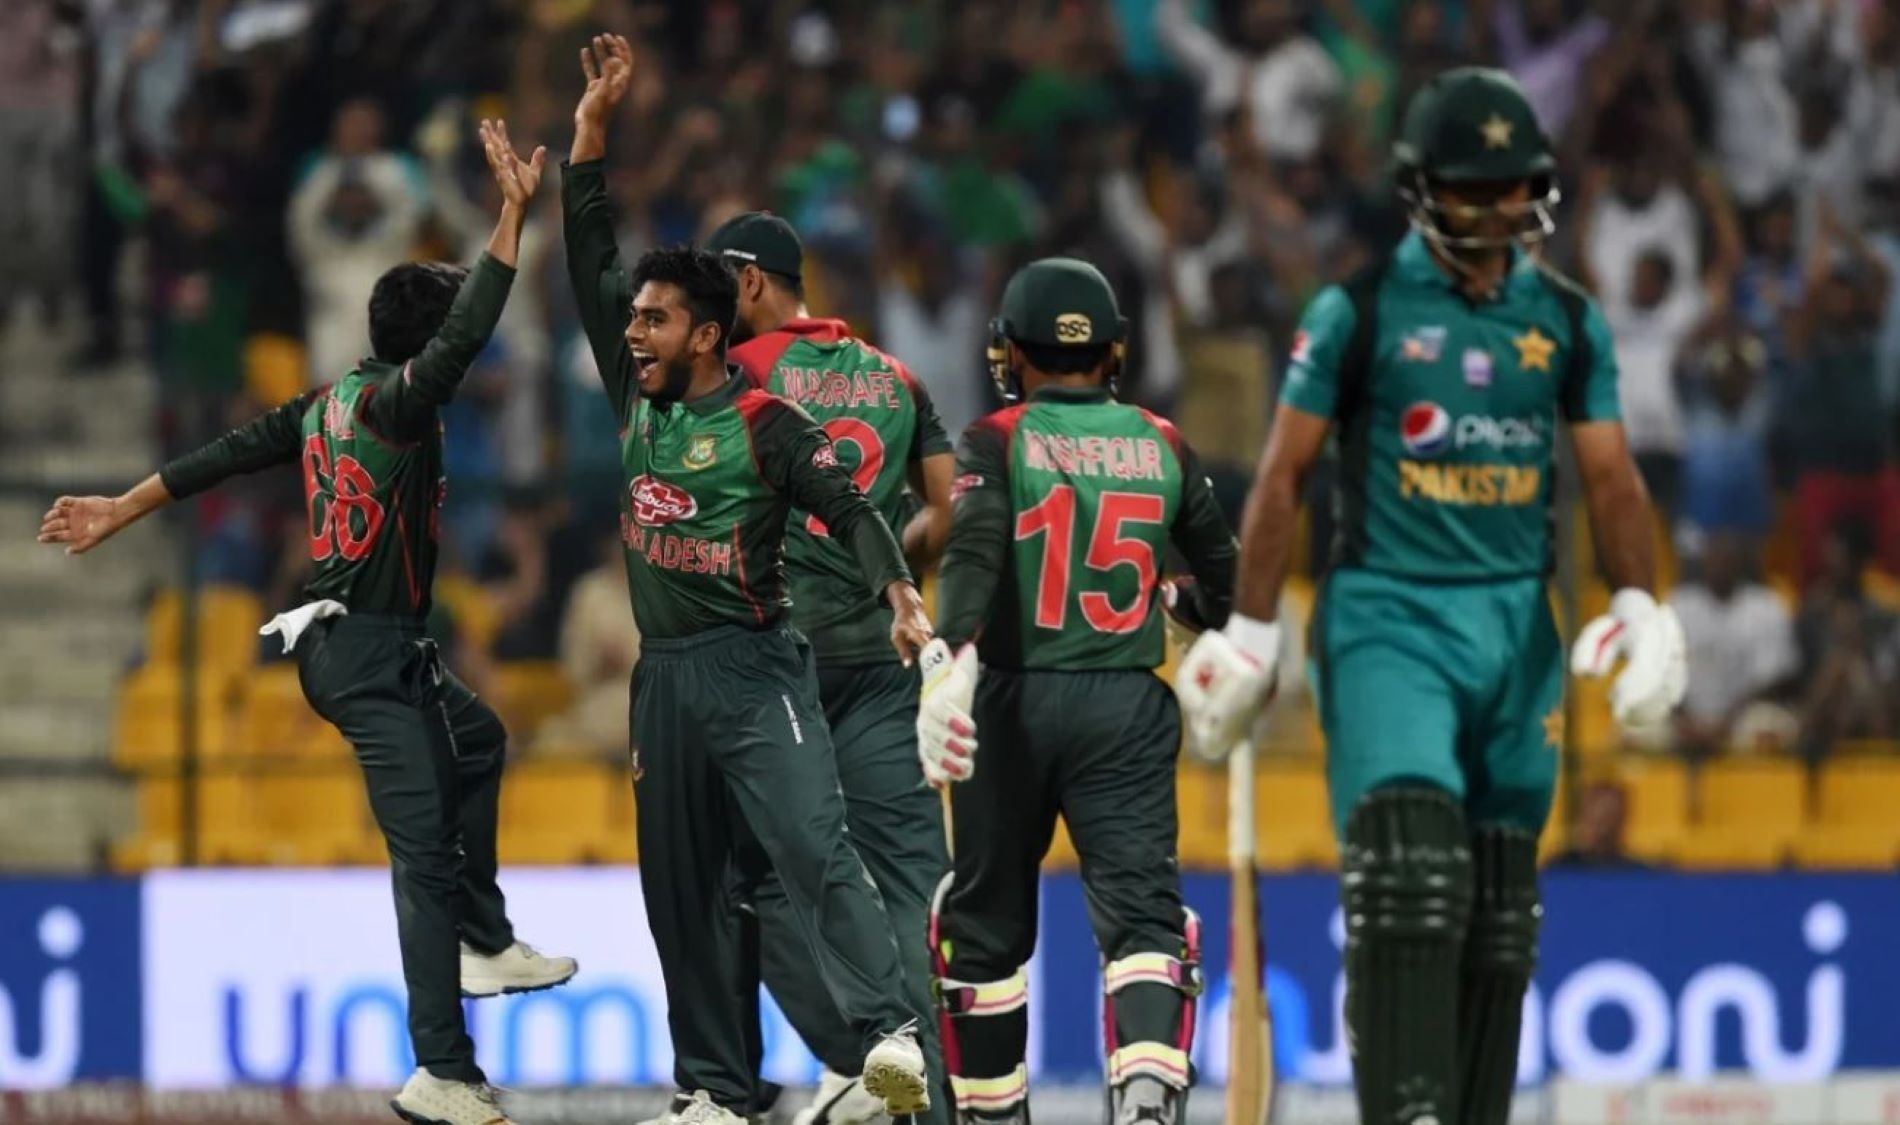 Bangladesh stunned Pakistan to reach the final of the 2018 Asia Cup.